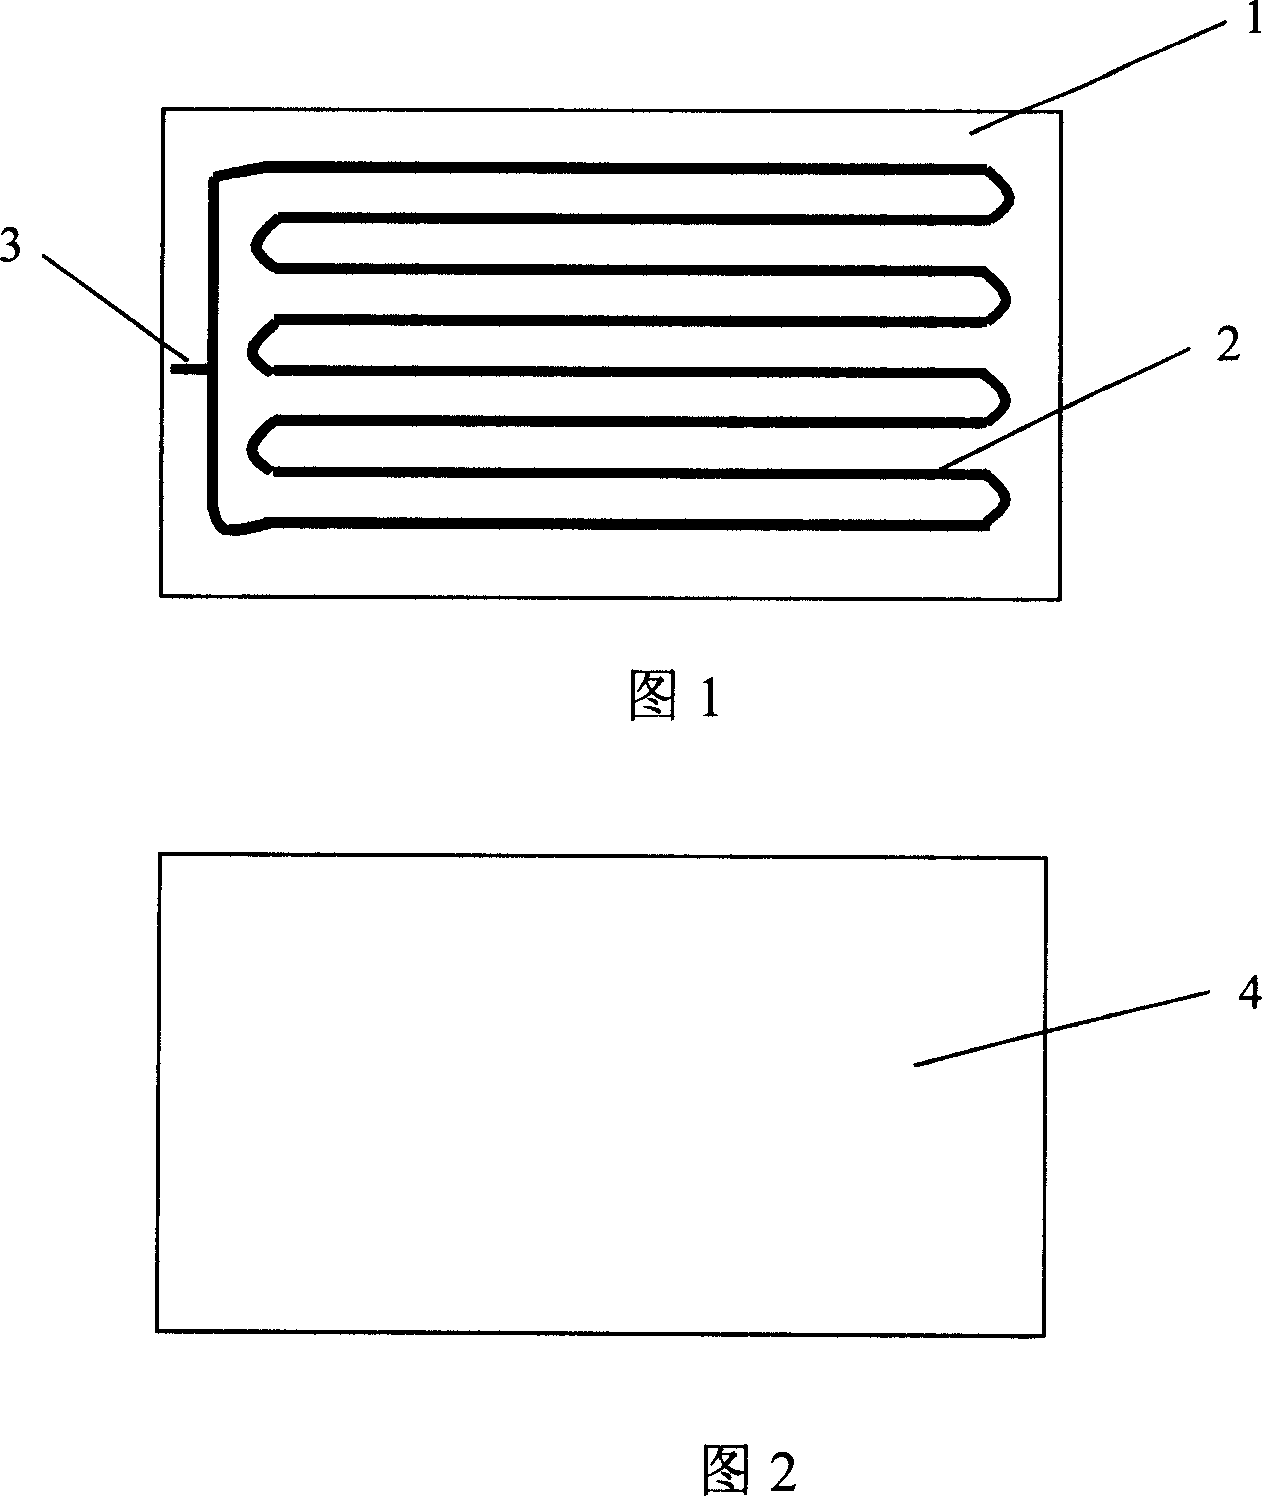 Pulsating heat pipe heating panel using microcapsule phase-change thermal storage fluid as operating means